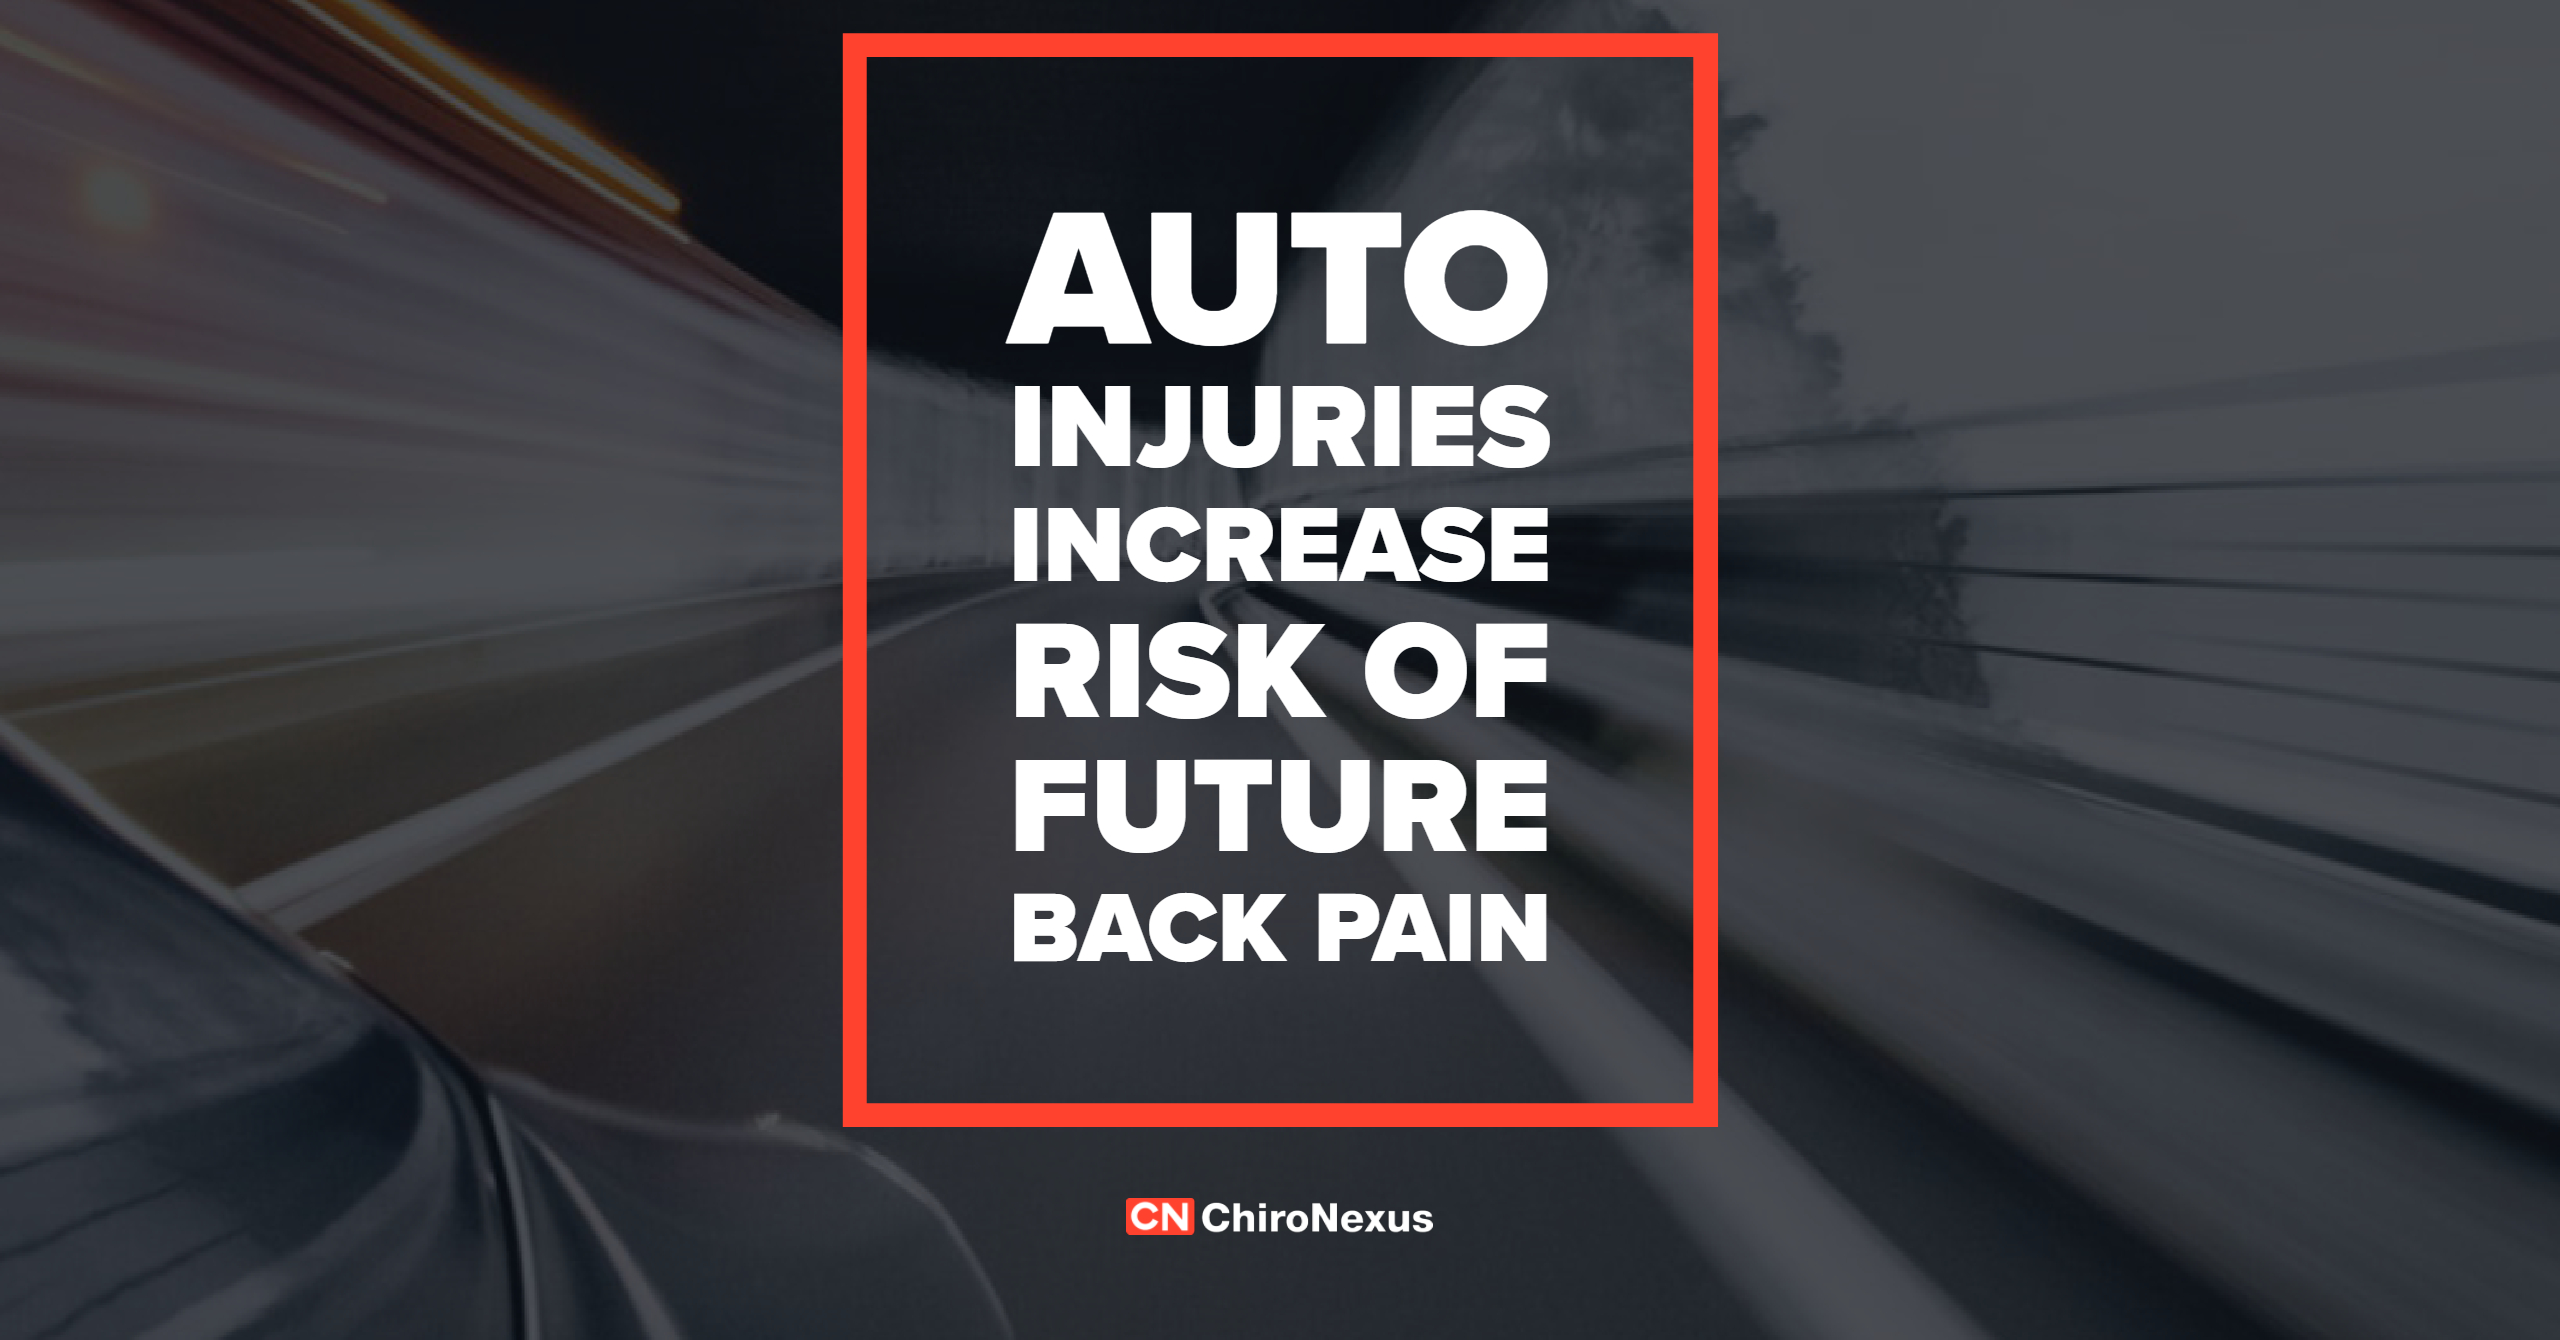 Auto Injuries Increase Risk of Future Back Pain